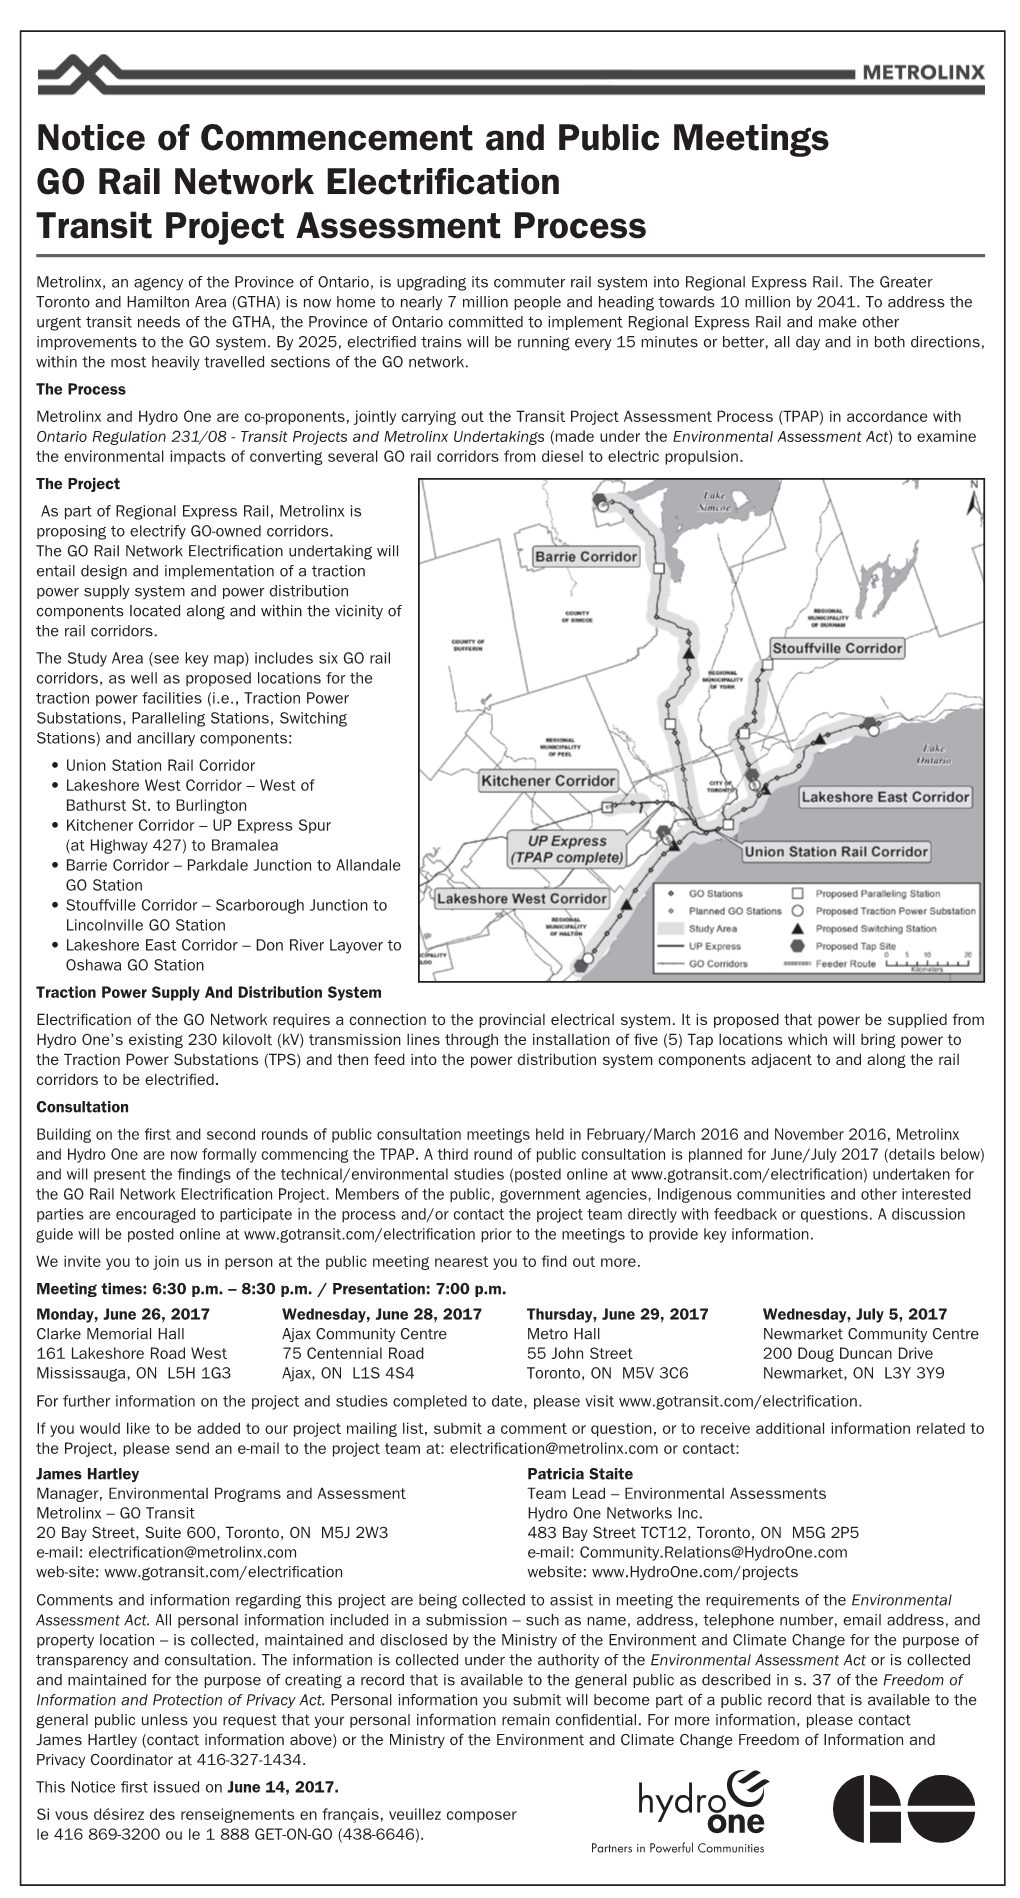 Notice of Commencement and Public Meetings GO Rail Network Electrification Transit Project Assessment Process